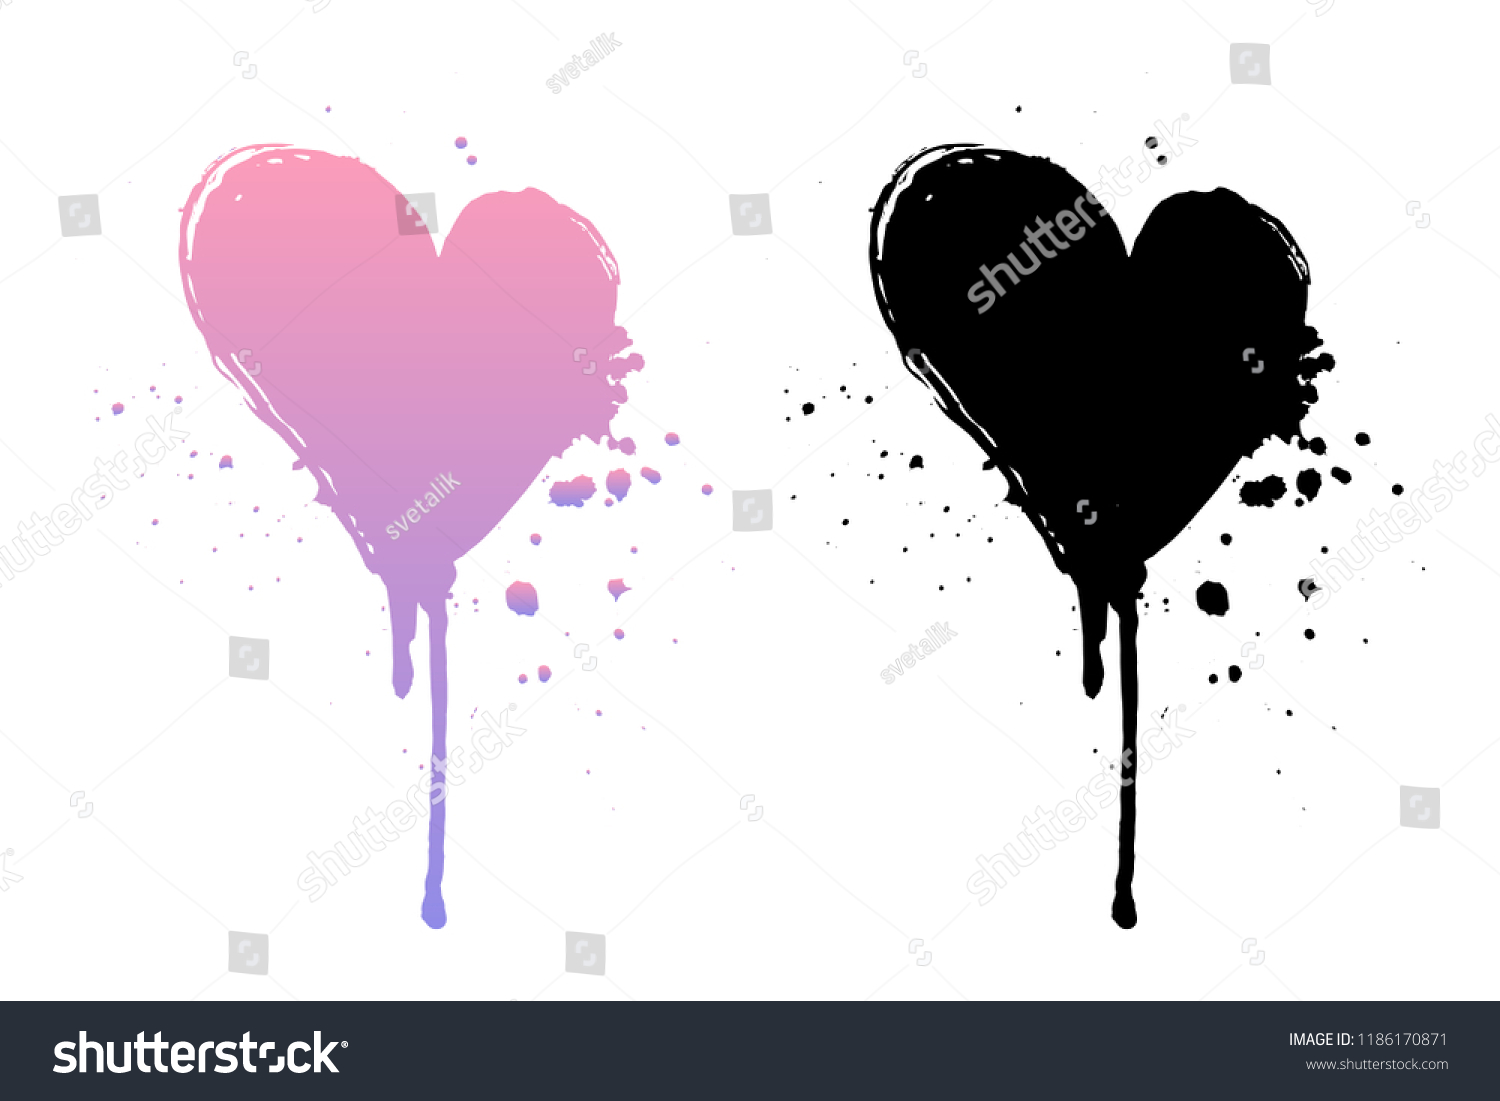 SVG of Dripping paint or black and pink grunge hearts. Brush stroke isolated on white background. Ink splatter illustration. svg